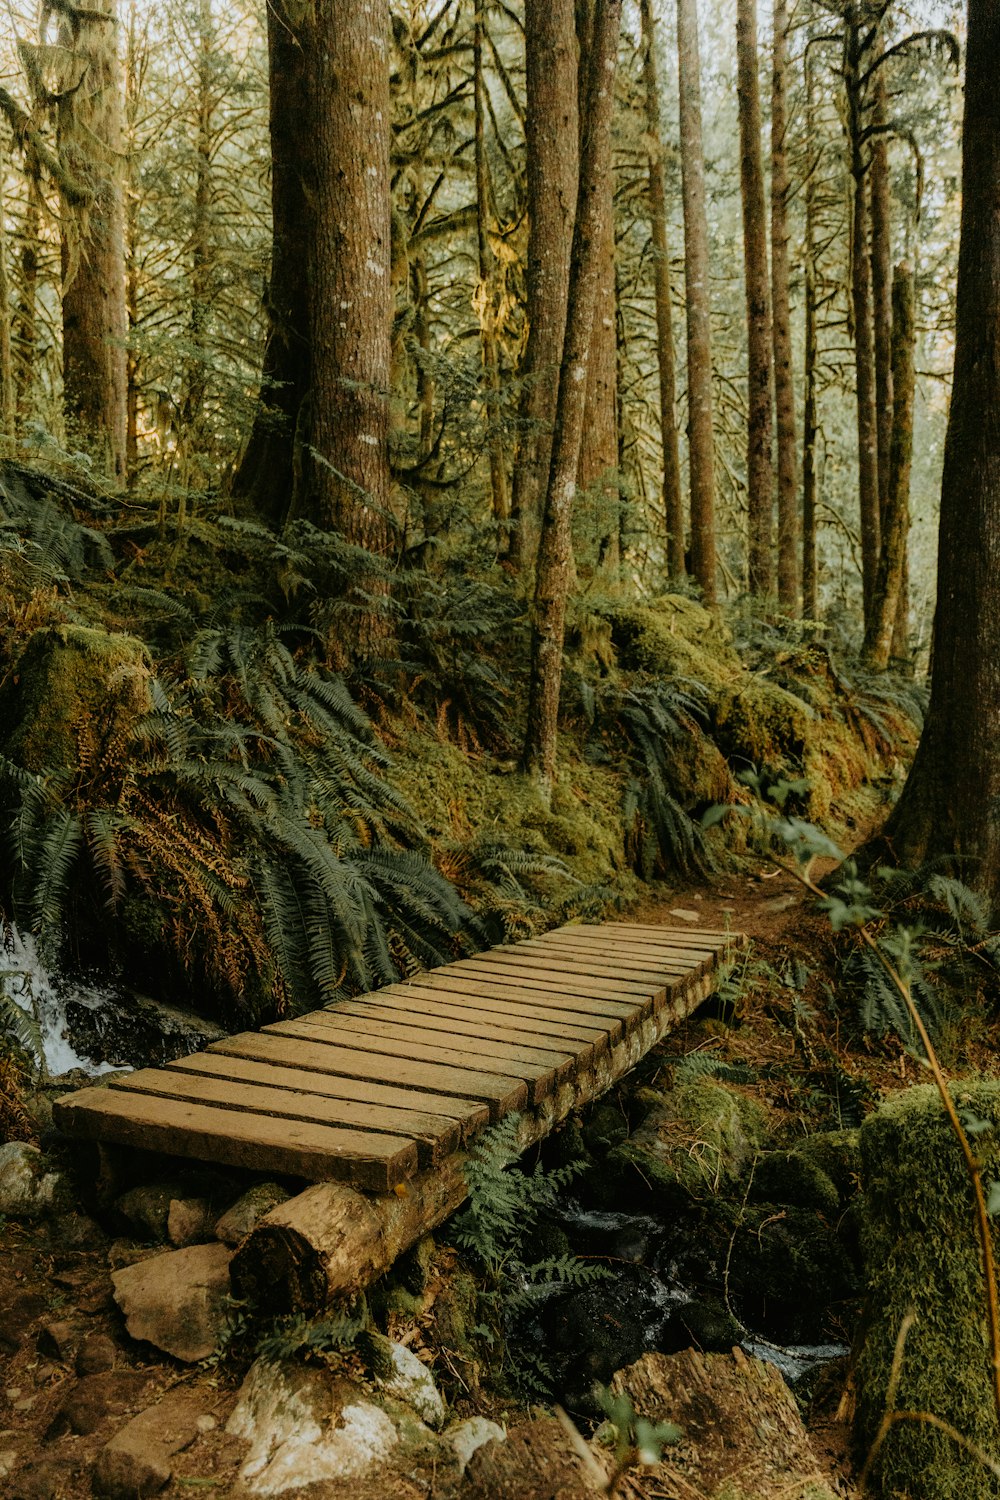 a wooden bridge crossing a stream in a forest